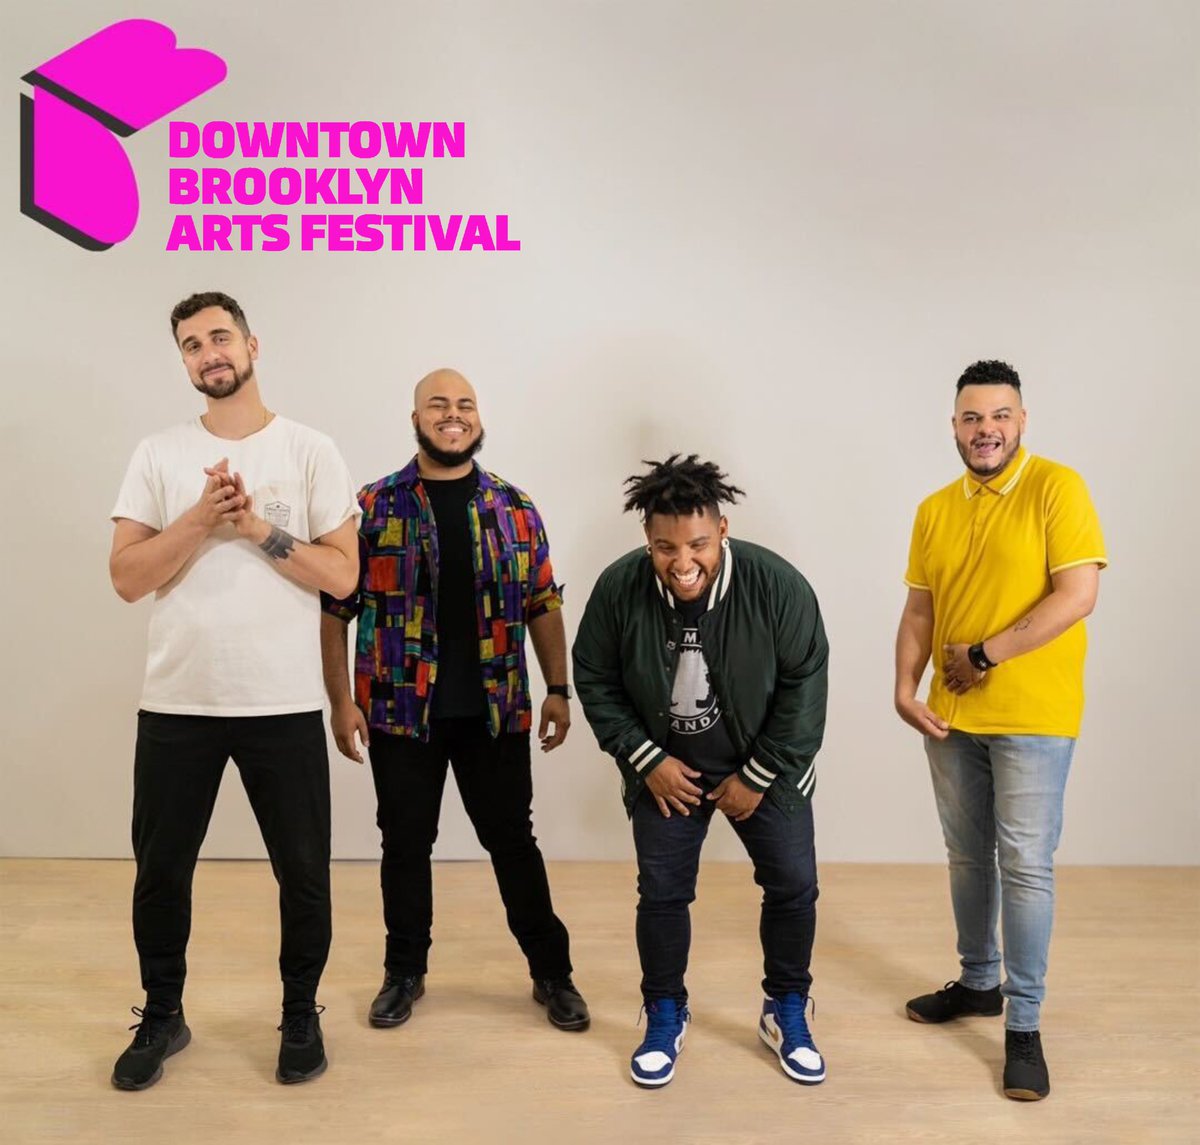 Caribbean soul band #AfroDominicano is coming to this year's #DowntownBrooklyn Arts Festival! 👏🏽 Watch the BK-based band perform a blend of Dominican folk, pop + rock during Day 2 of #DBAF2022. 🇩🇴 ⏰ Oct. 1, 4PM 📍 The Plaza at 300 Ashland 🌐 dbartsfestival.org @TwoTreesNY